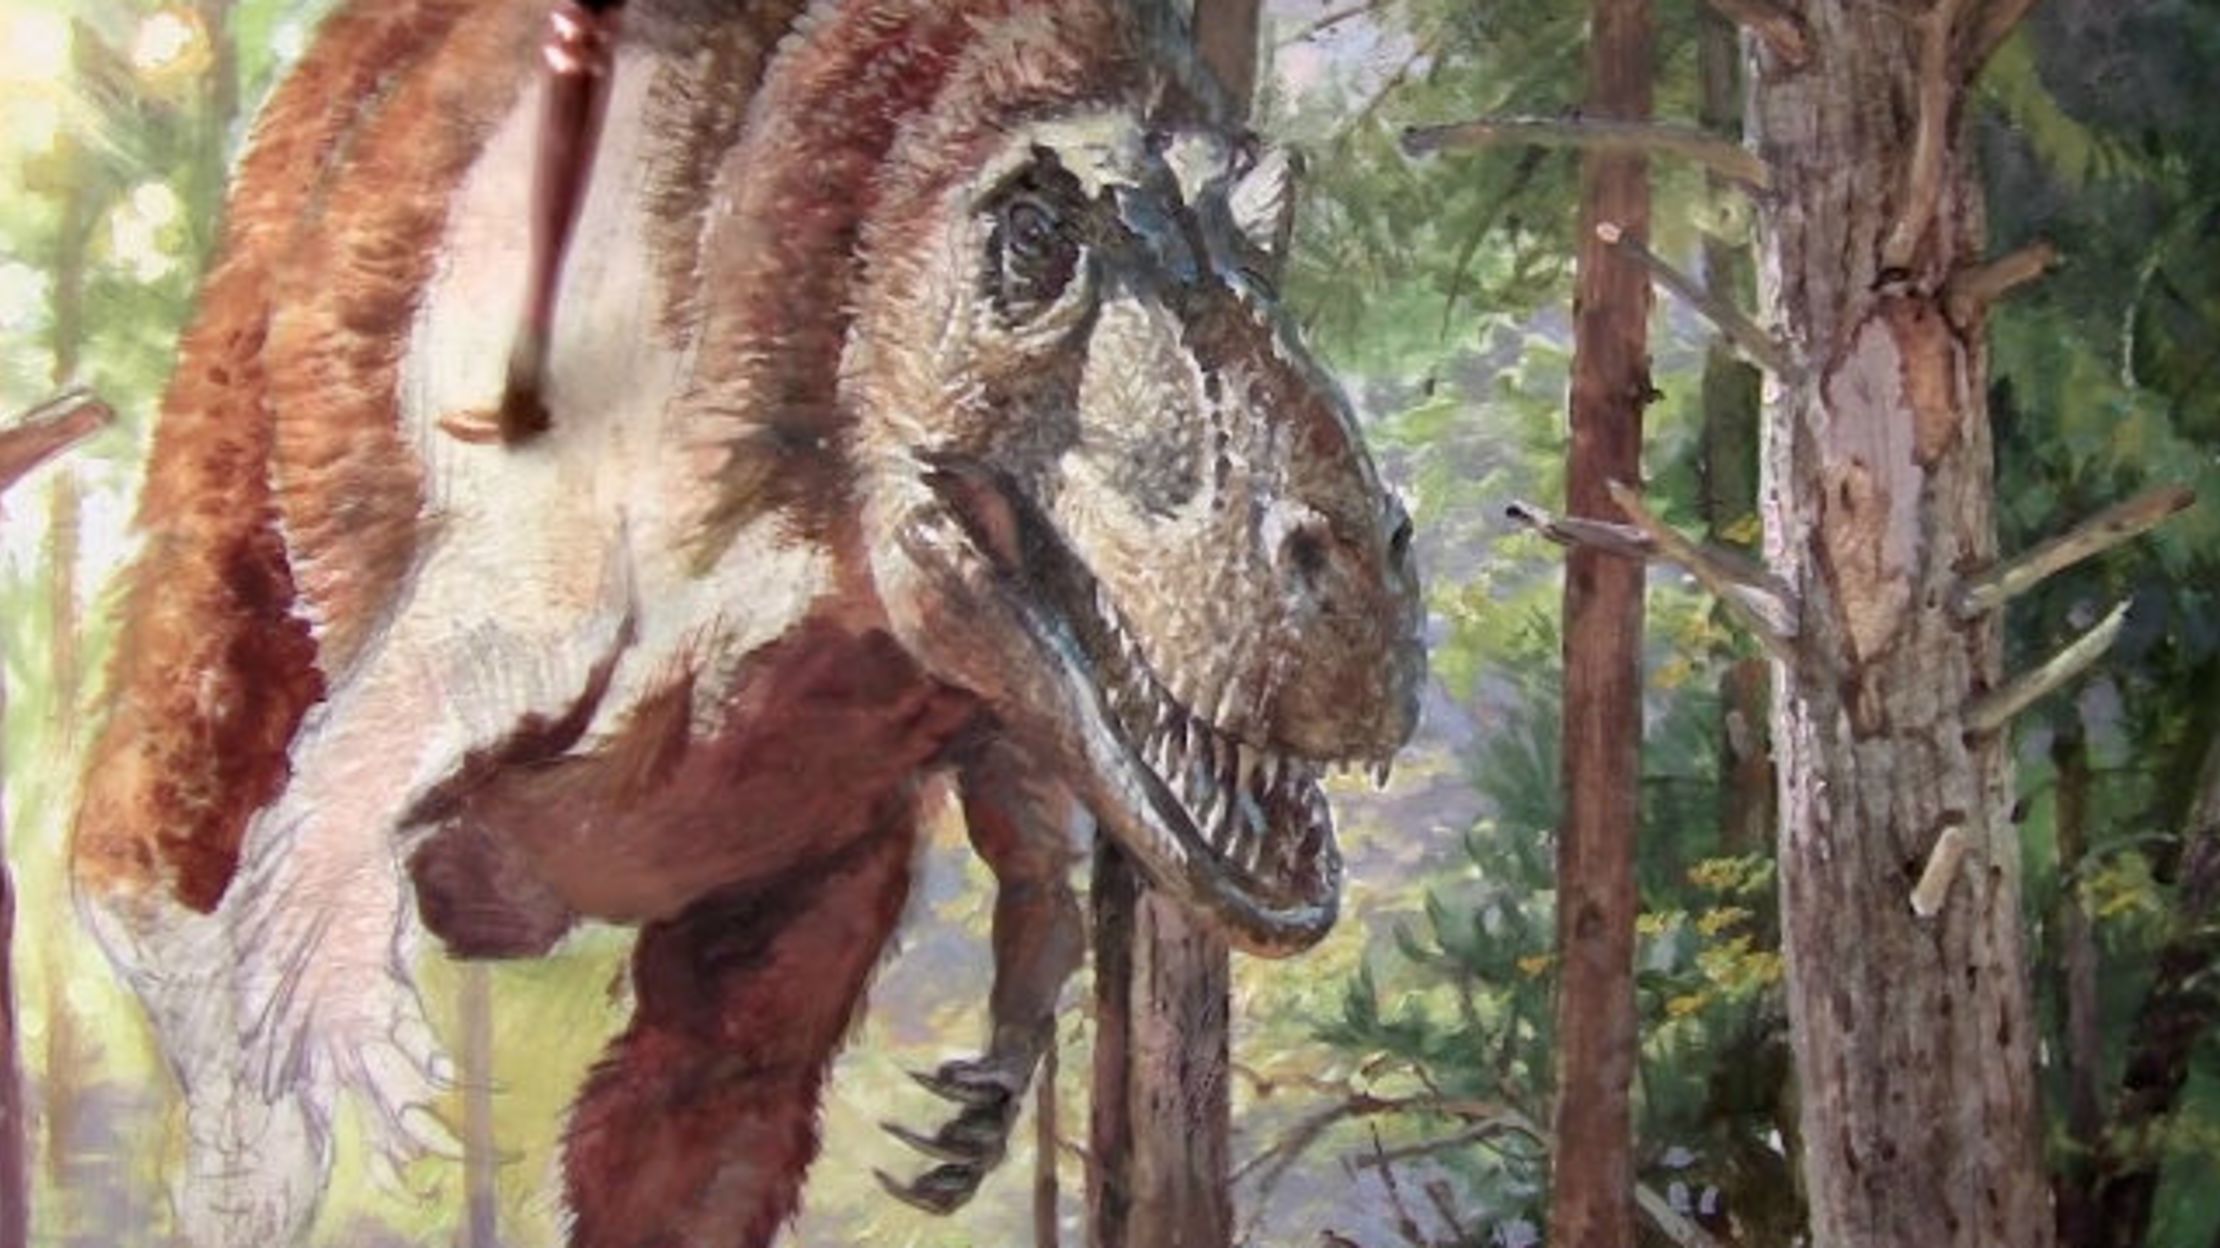 How Paleoartists Recreate And Illustrate Dinosaurs Mental Floss